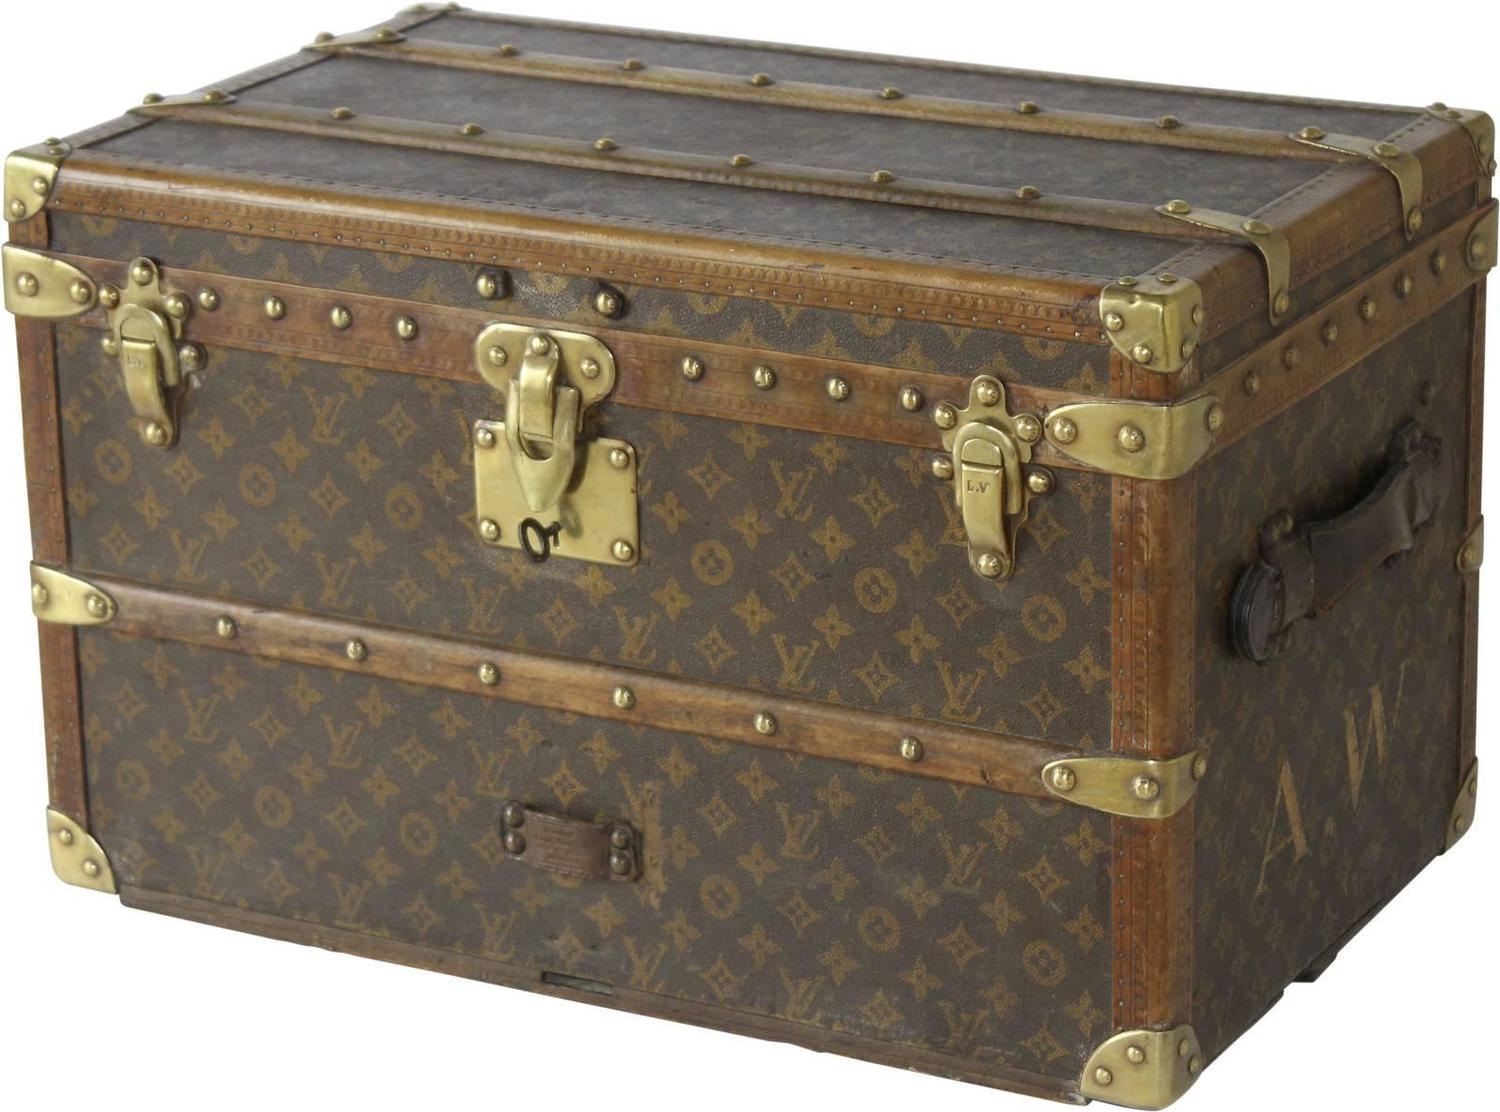 Extremely Rare 1930s Louis Vuitton Shoe Trunk For Sale at 1stdibs